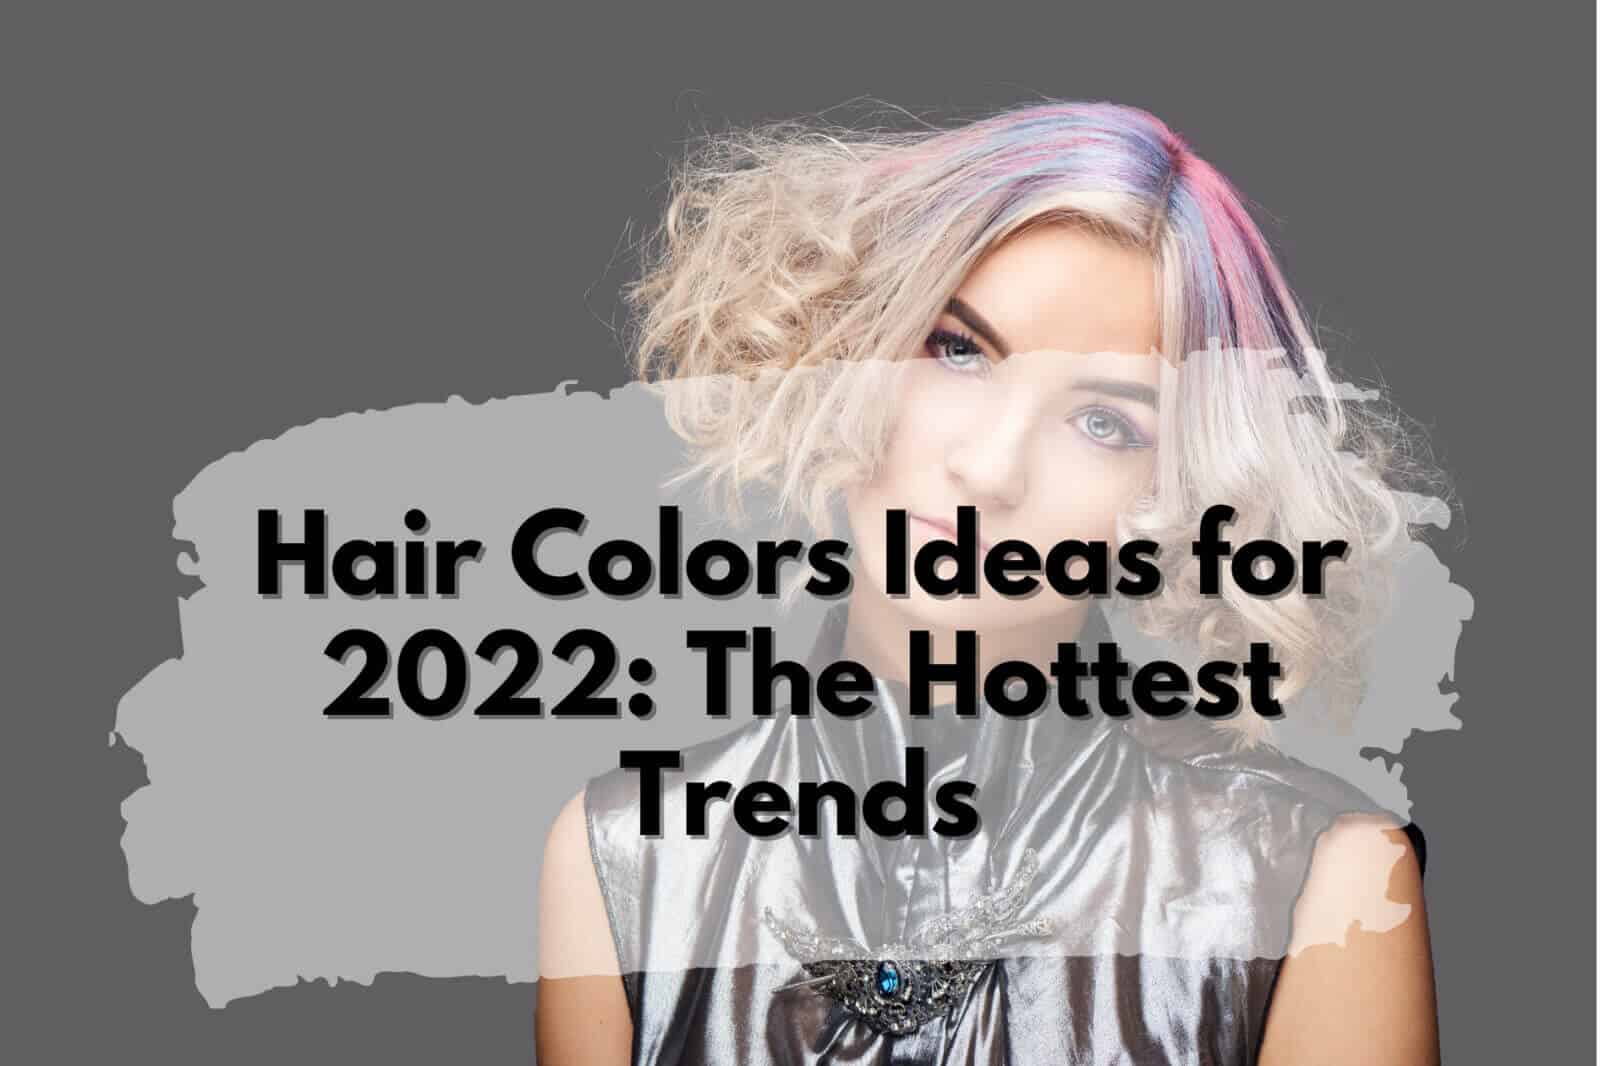 Hair Colors Ideas for 2022: hottest trends.